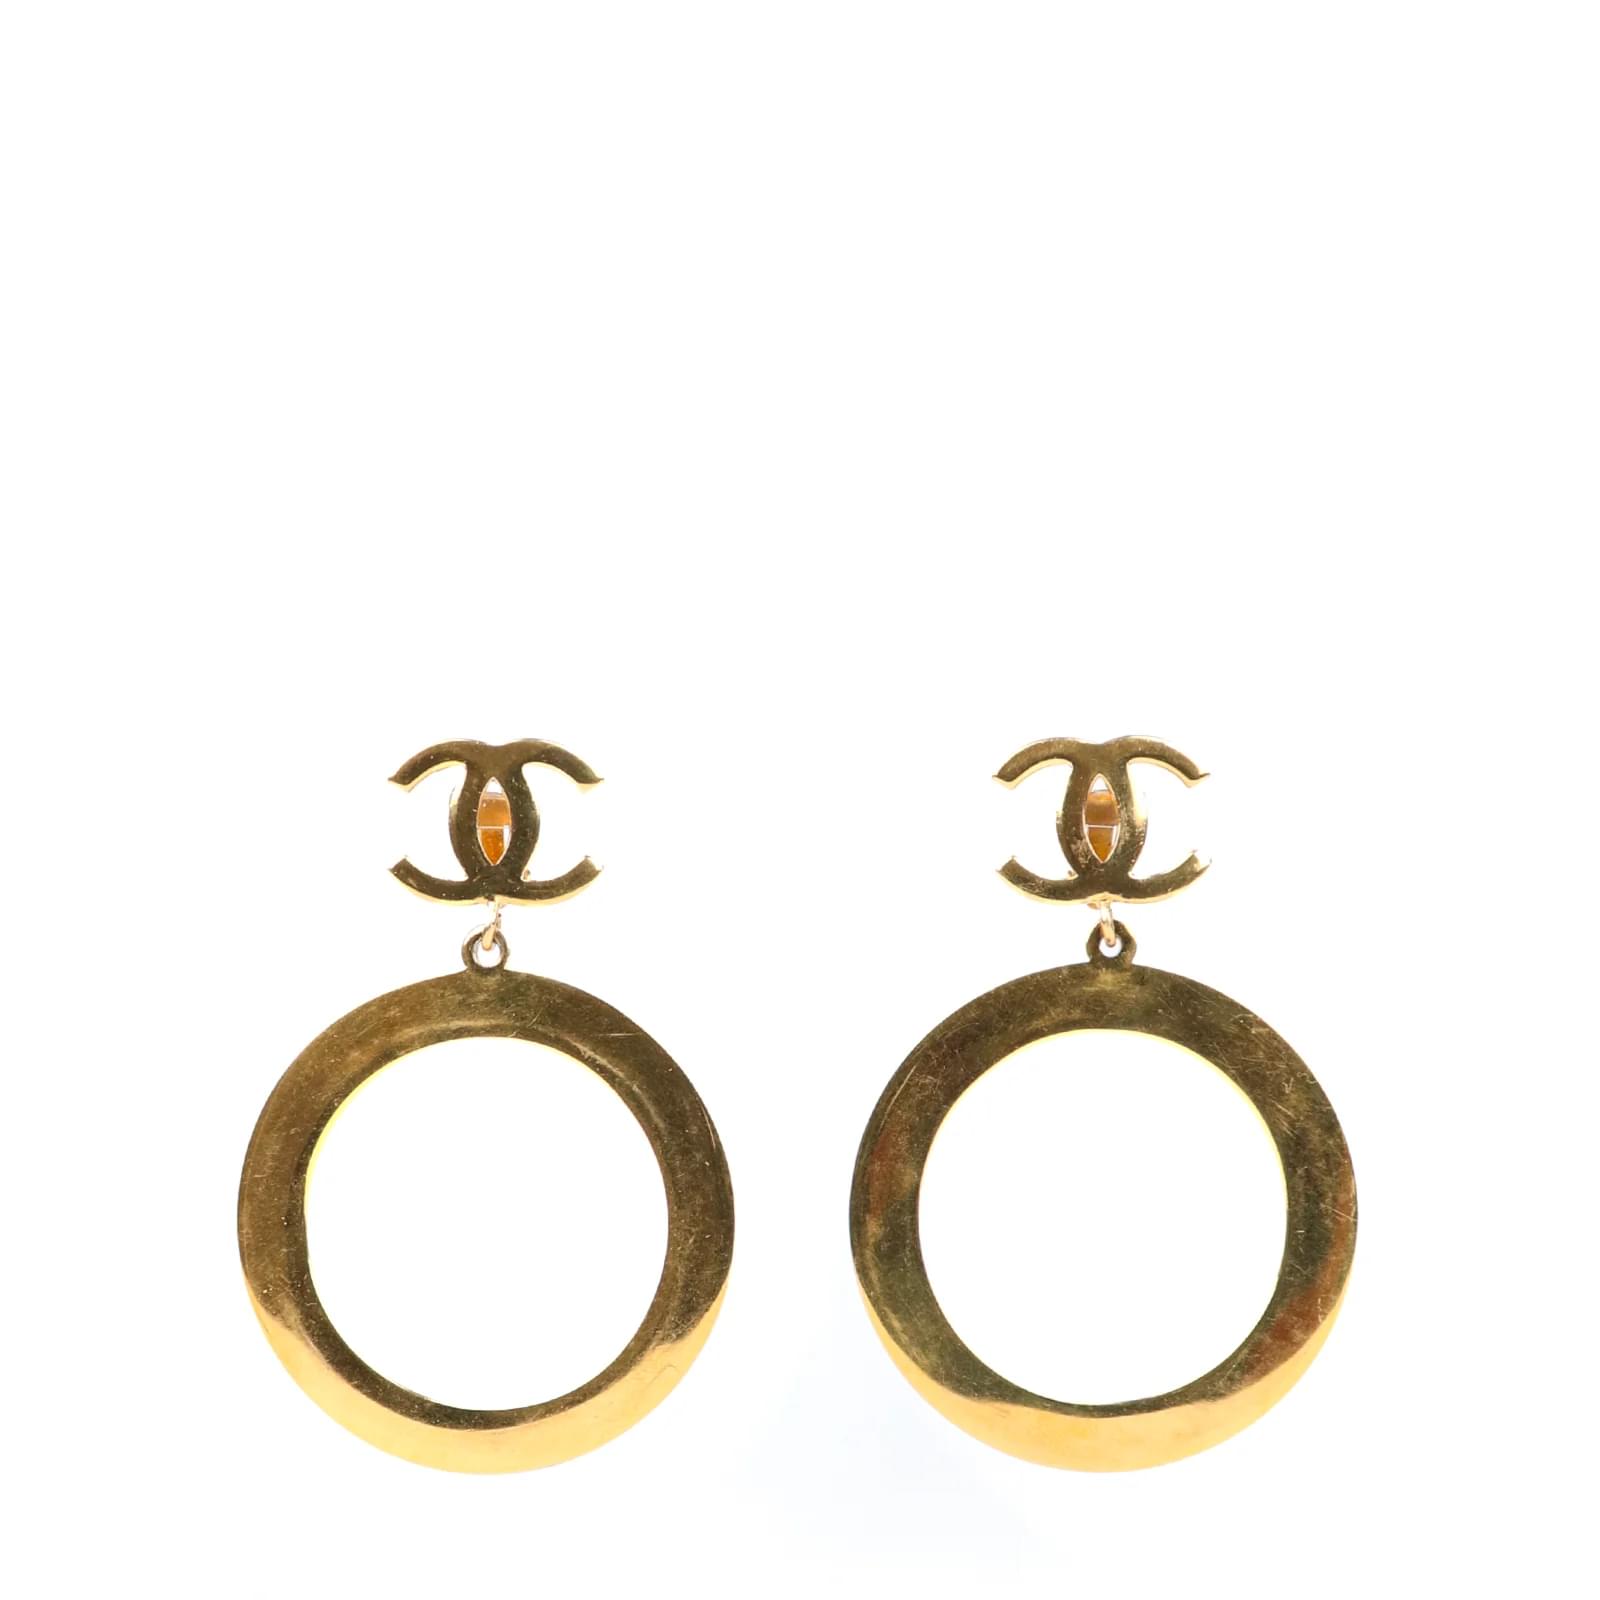 Chanel Vintage Large Round Earrings with Black and Golden CC Mark - 2 Pieces